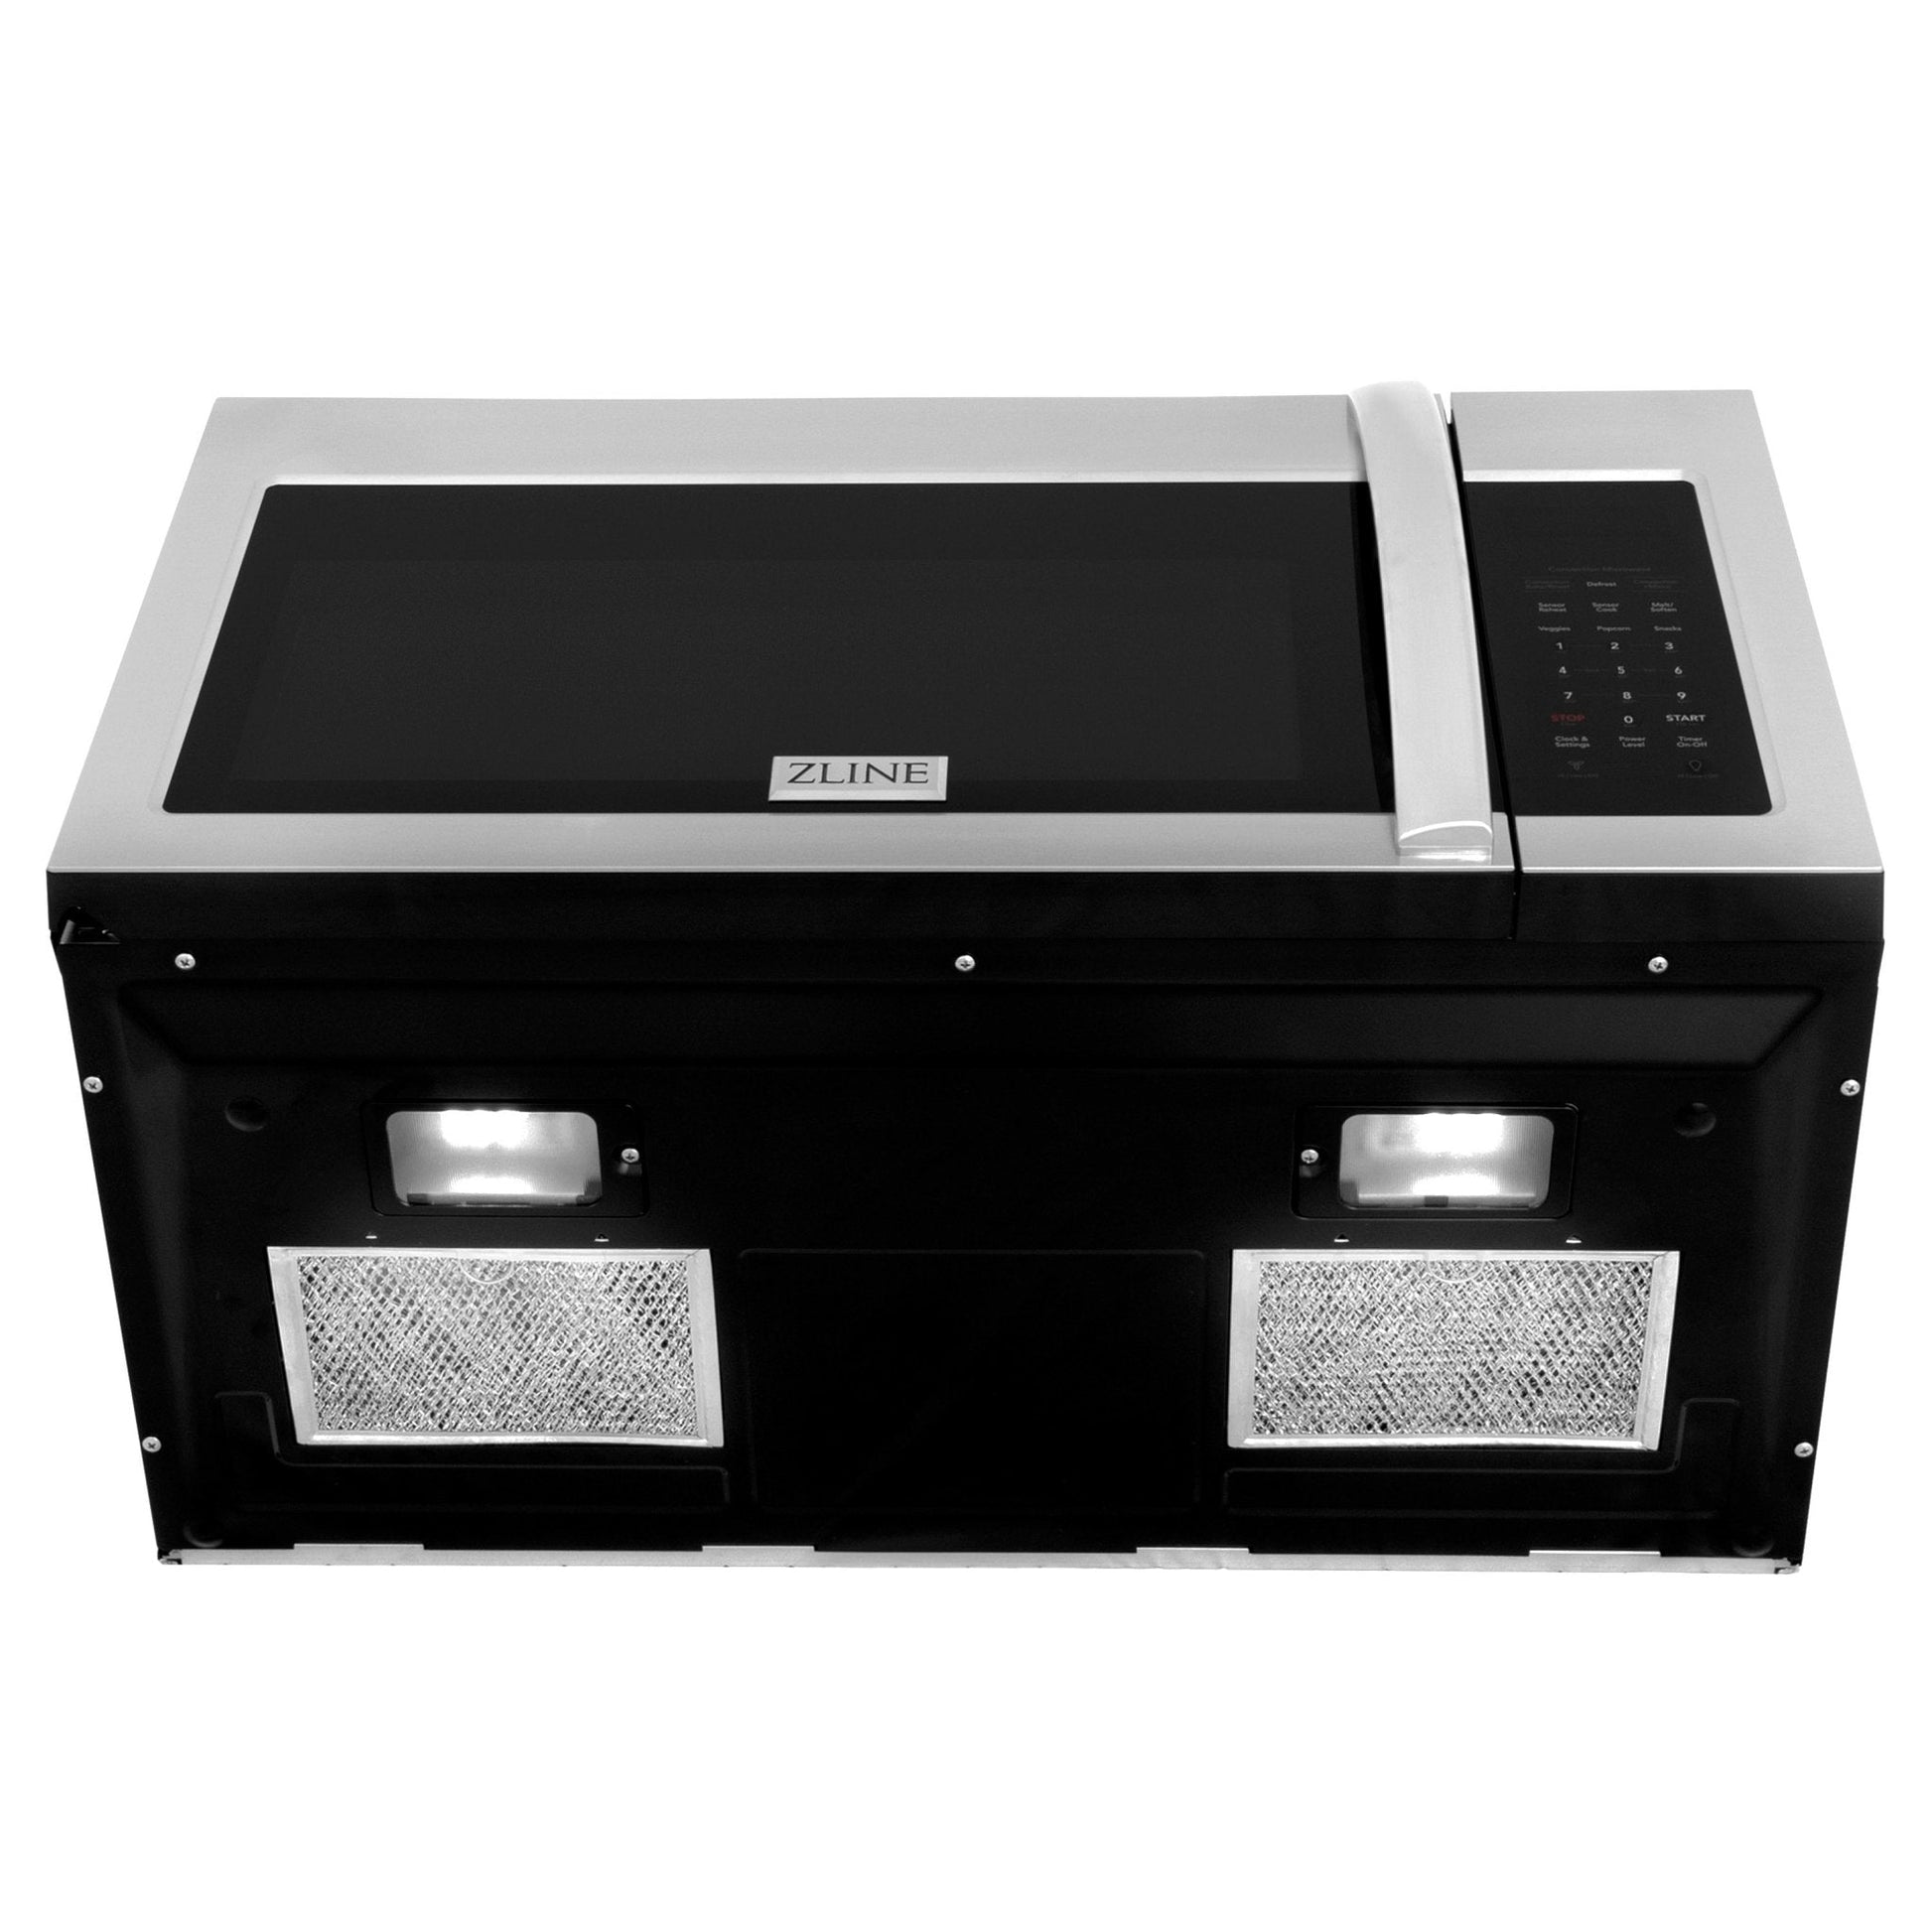 ZLINE 30" Over-the-Range Convection Microwave Oven - Recirculating, Charcoal Filters - Stainless Steel